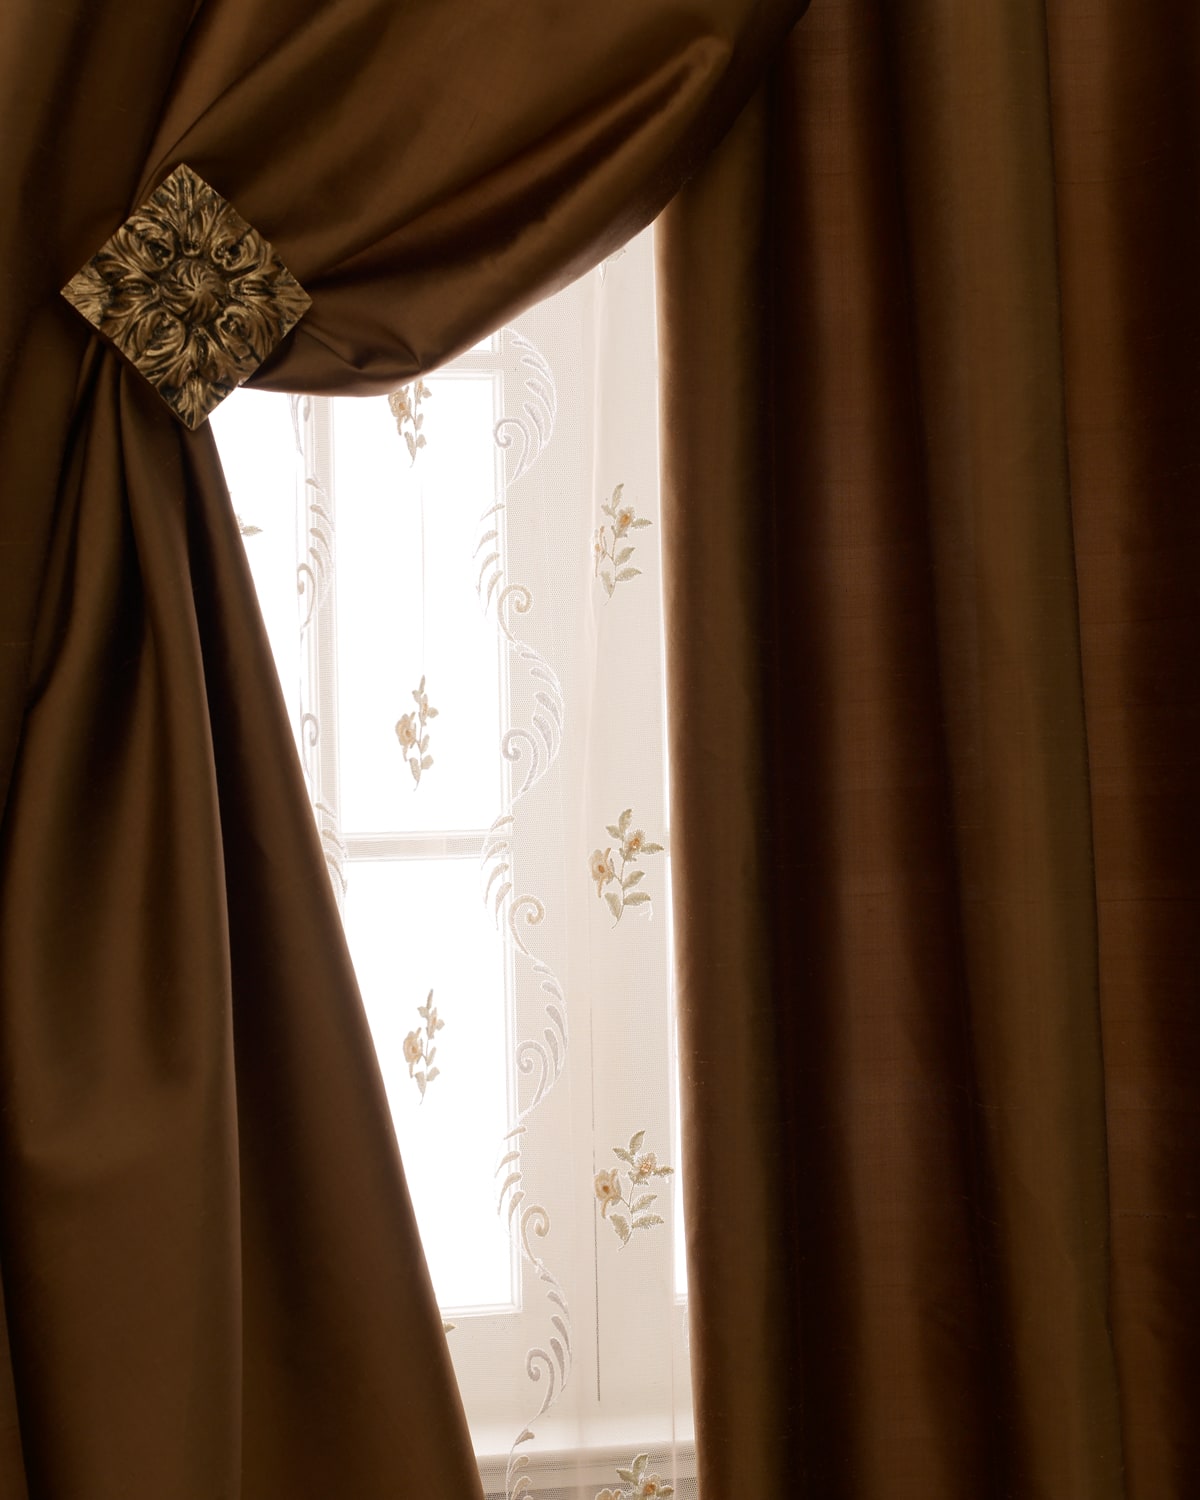 Ambrosia 100% linen drapes with Matrix embr tape. also sold by Neiman M pair 